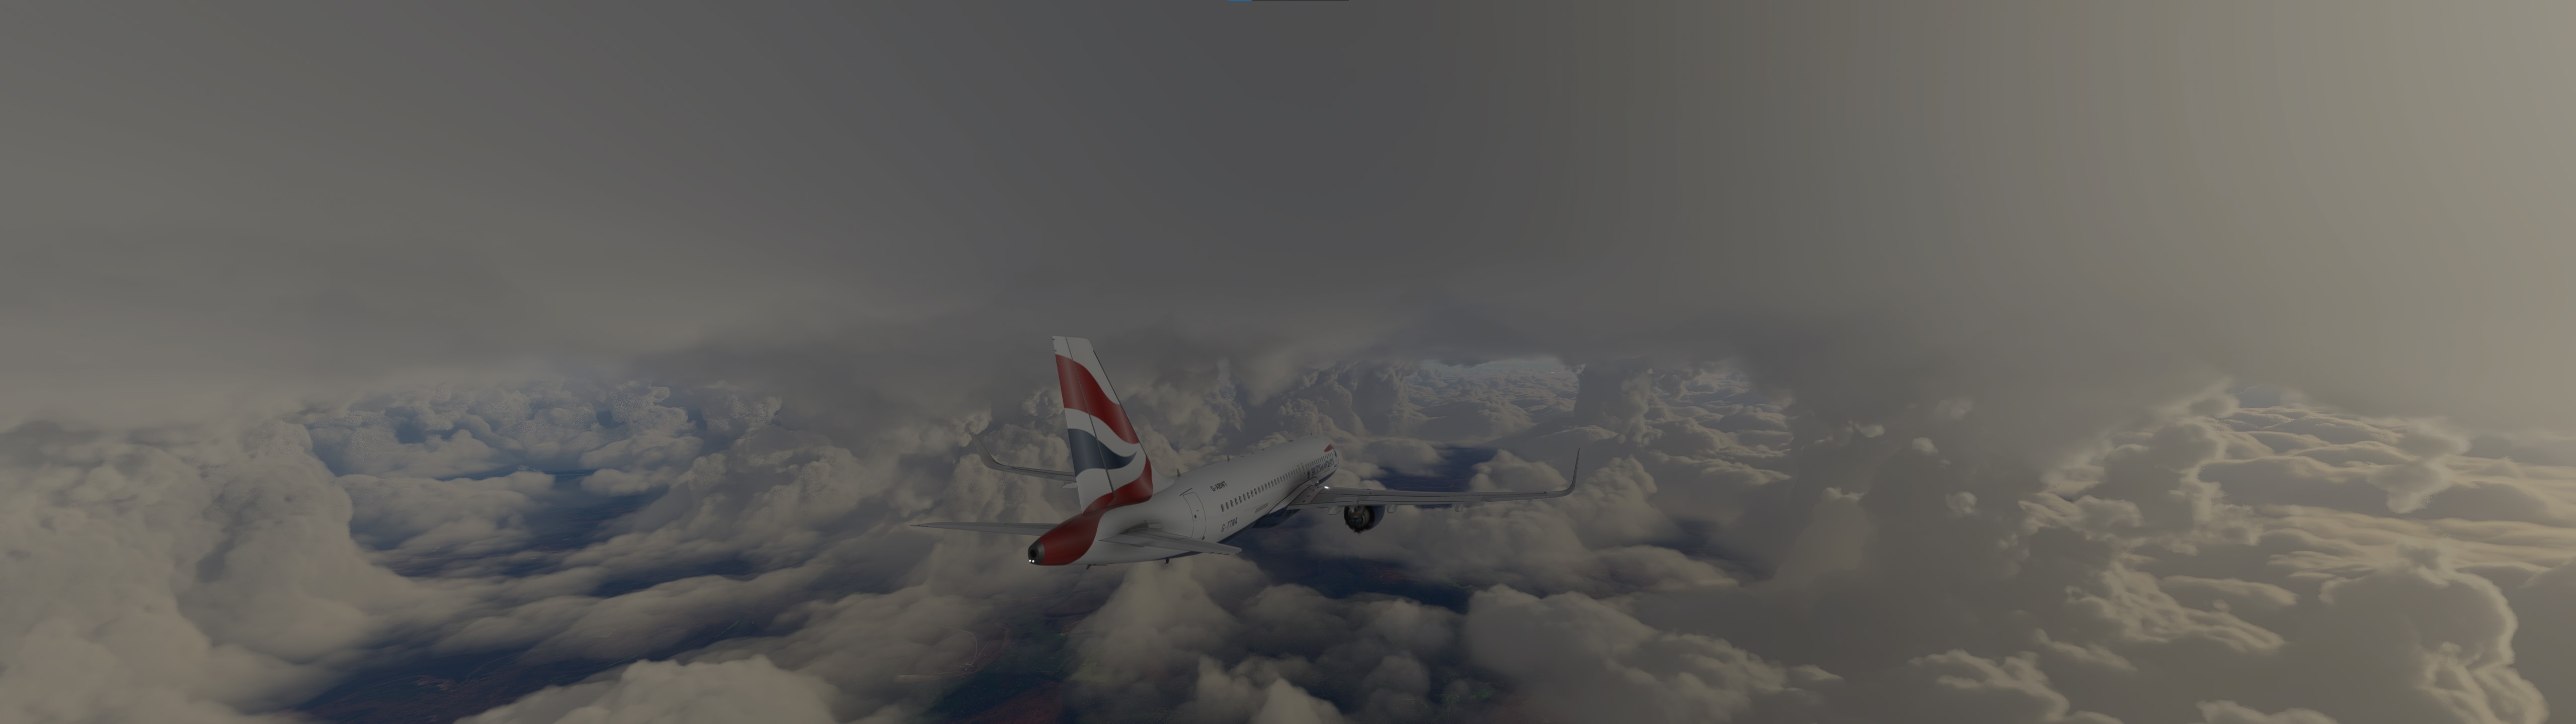 Flight Simulator Flying Airbus A320 Sky Clouds Aircraft Airplane 5120x1440